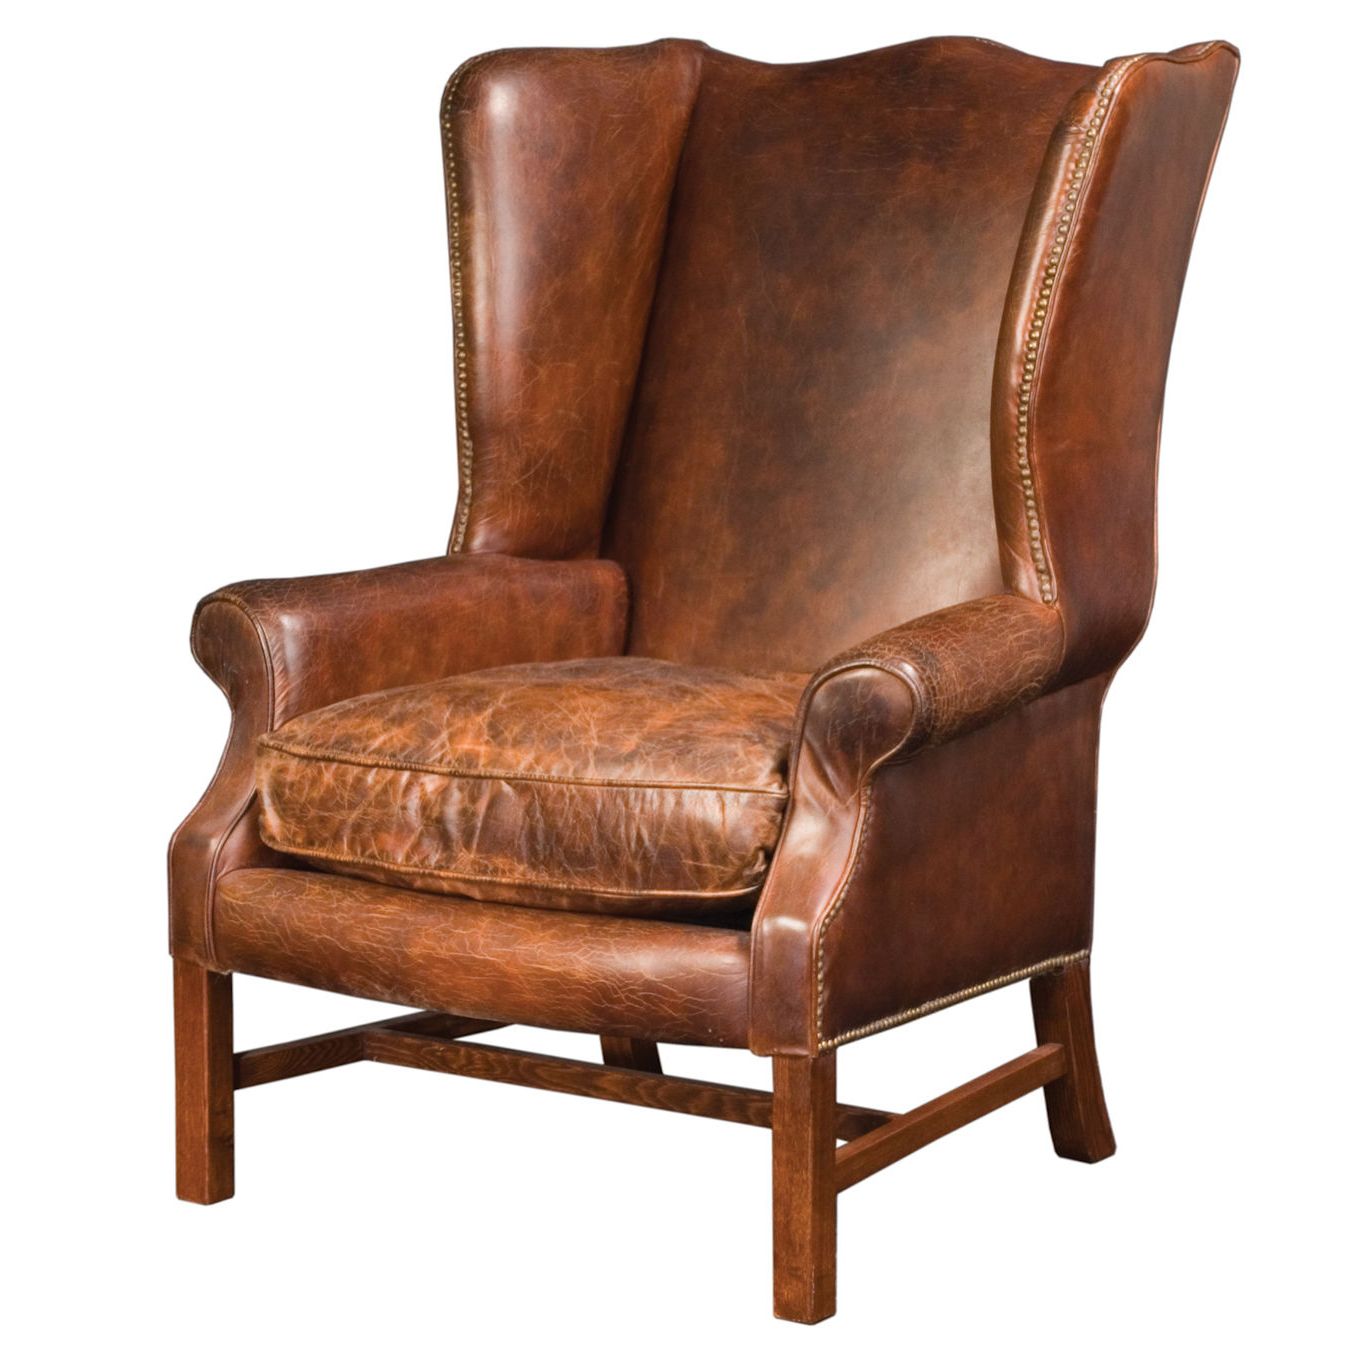 Wing chair leather Image from: Leather wing chair pretty AGTDKLL